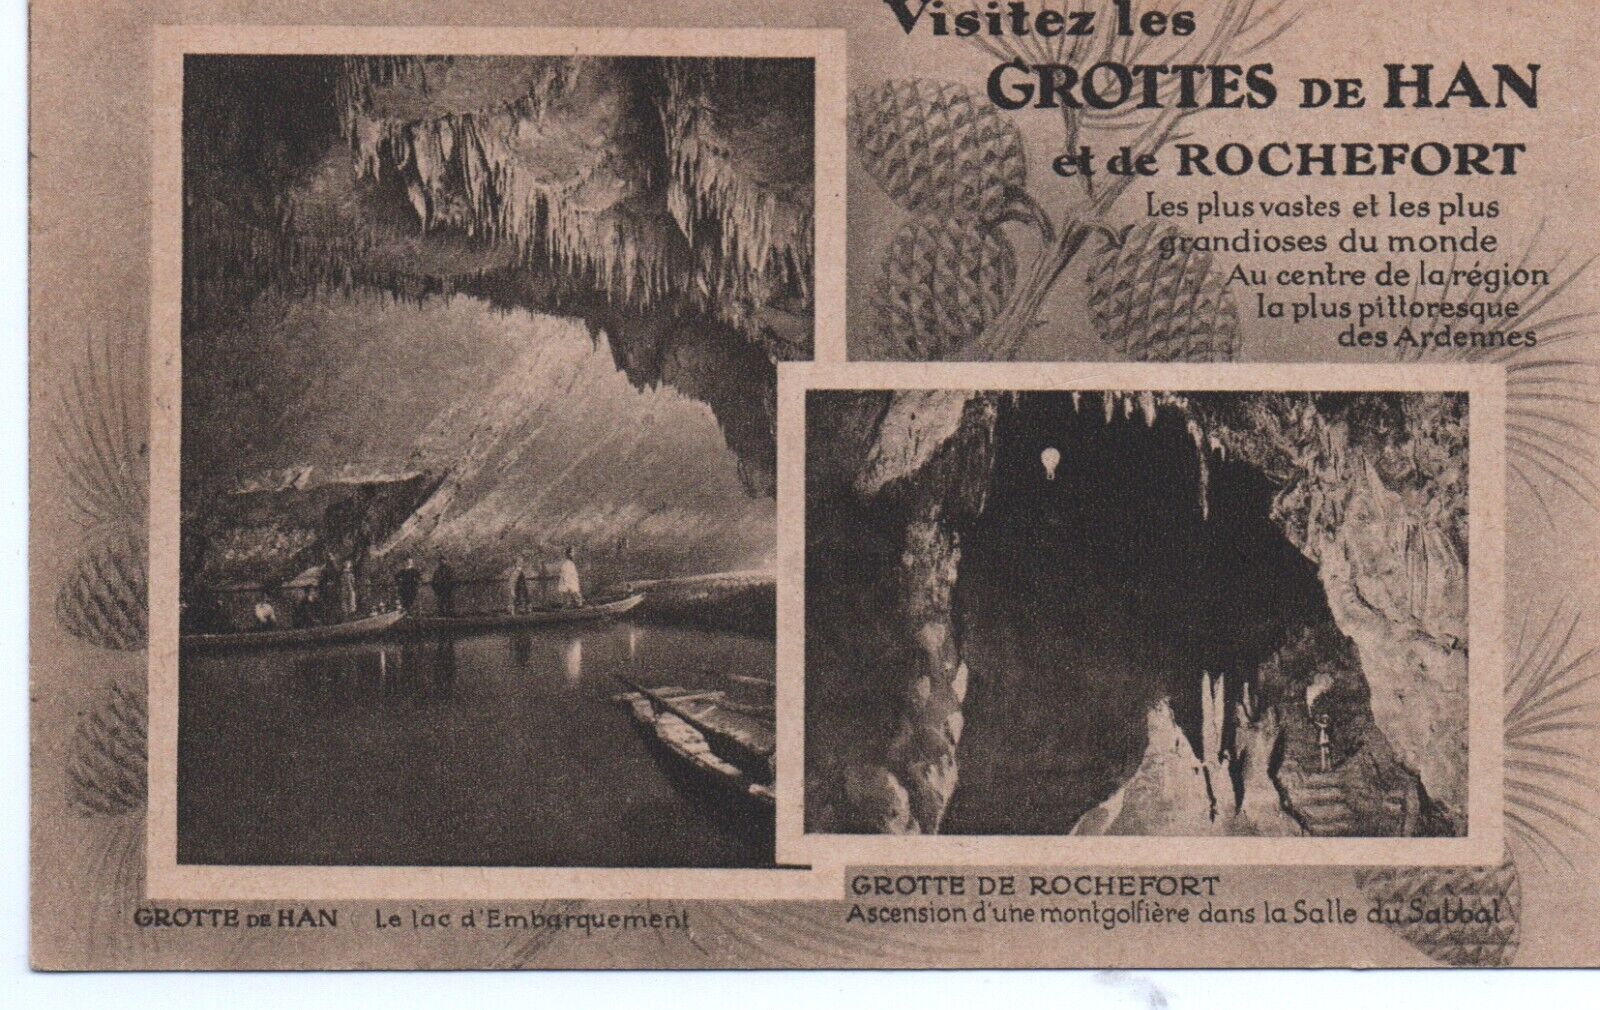 CPA - Visit the HAN and ROCHEFORT CAVES - Two Views